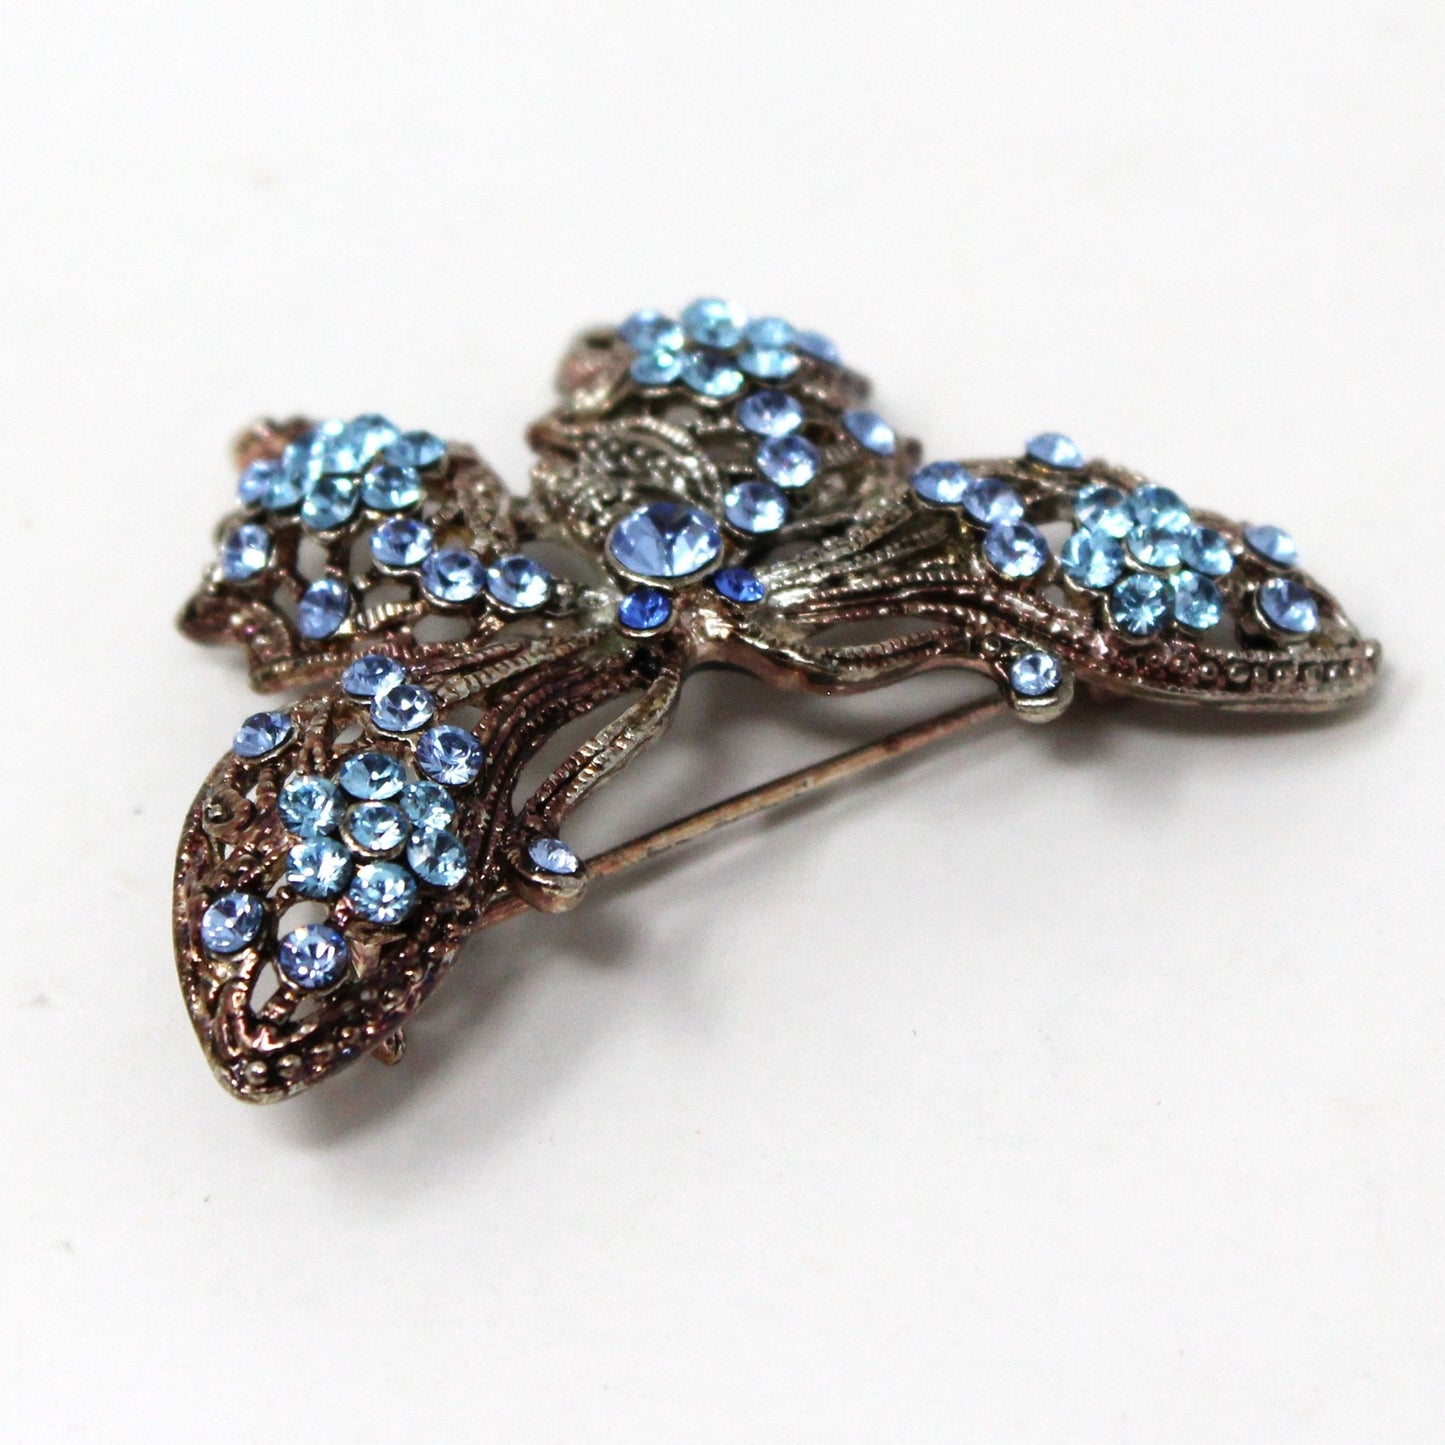 Brooch / Pin, Figural Butterfly, Blue Swarovski Crystals, Antiqued Silver Tone